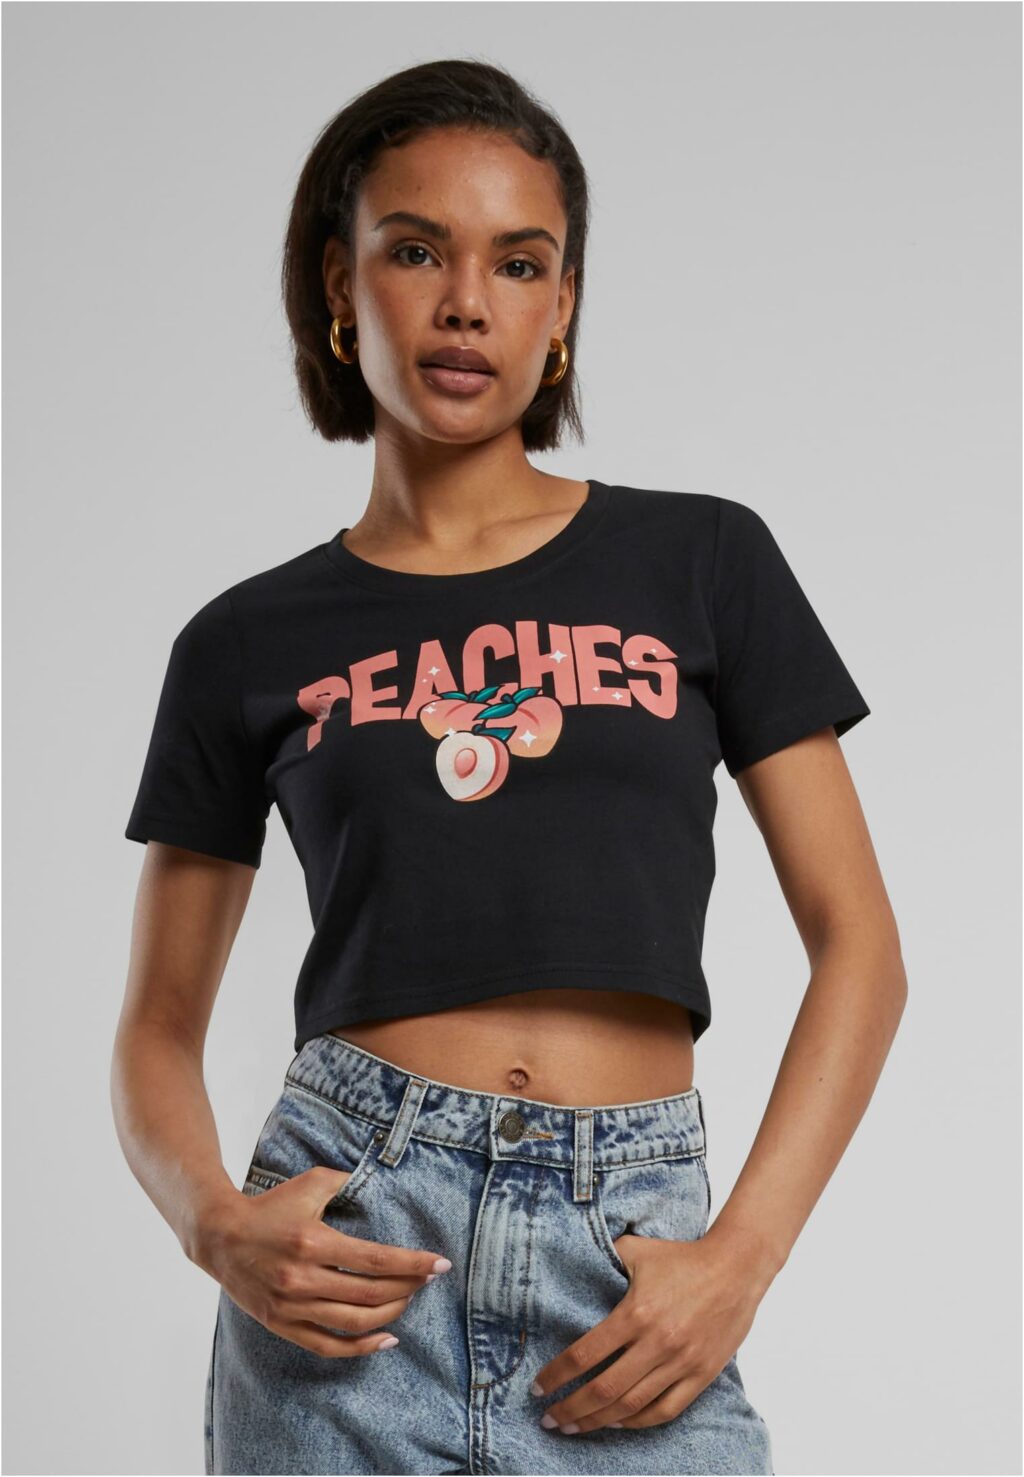 Peaches Cropped Tee black MST011